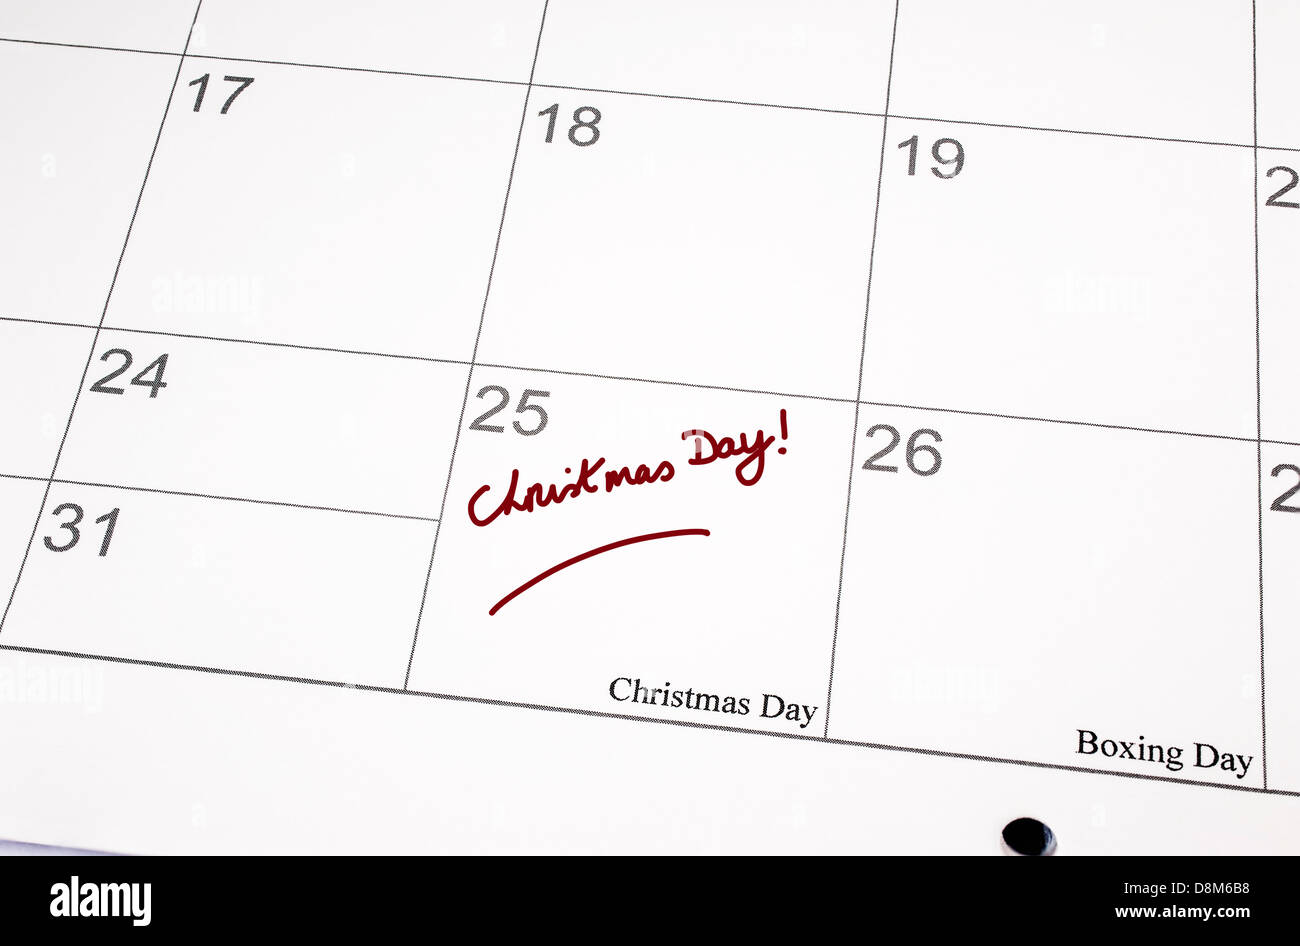 Calendar page showing Christmas Day written in the date space Stock Photo